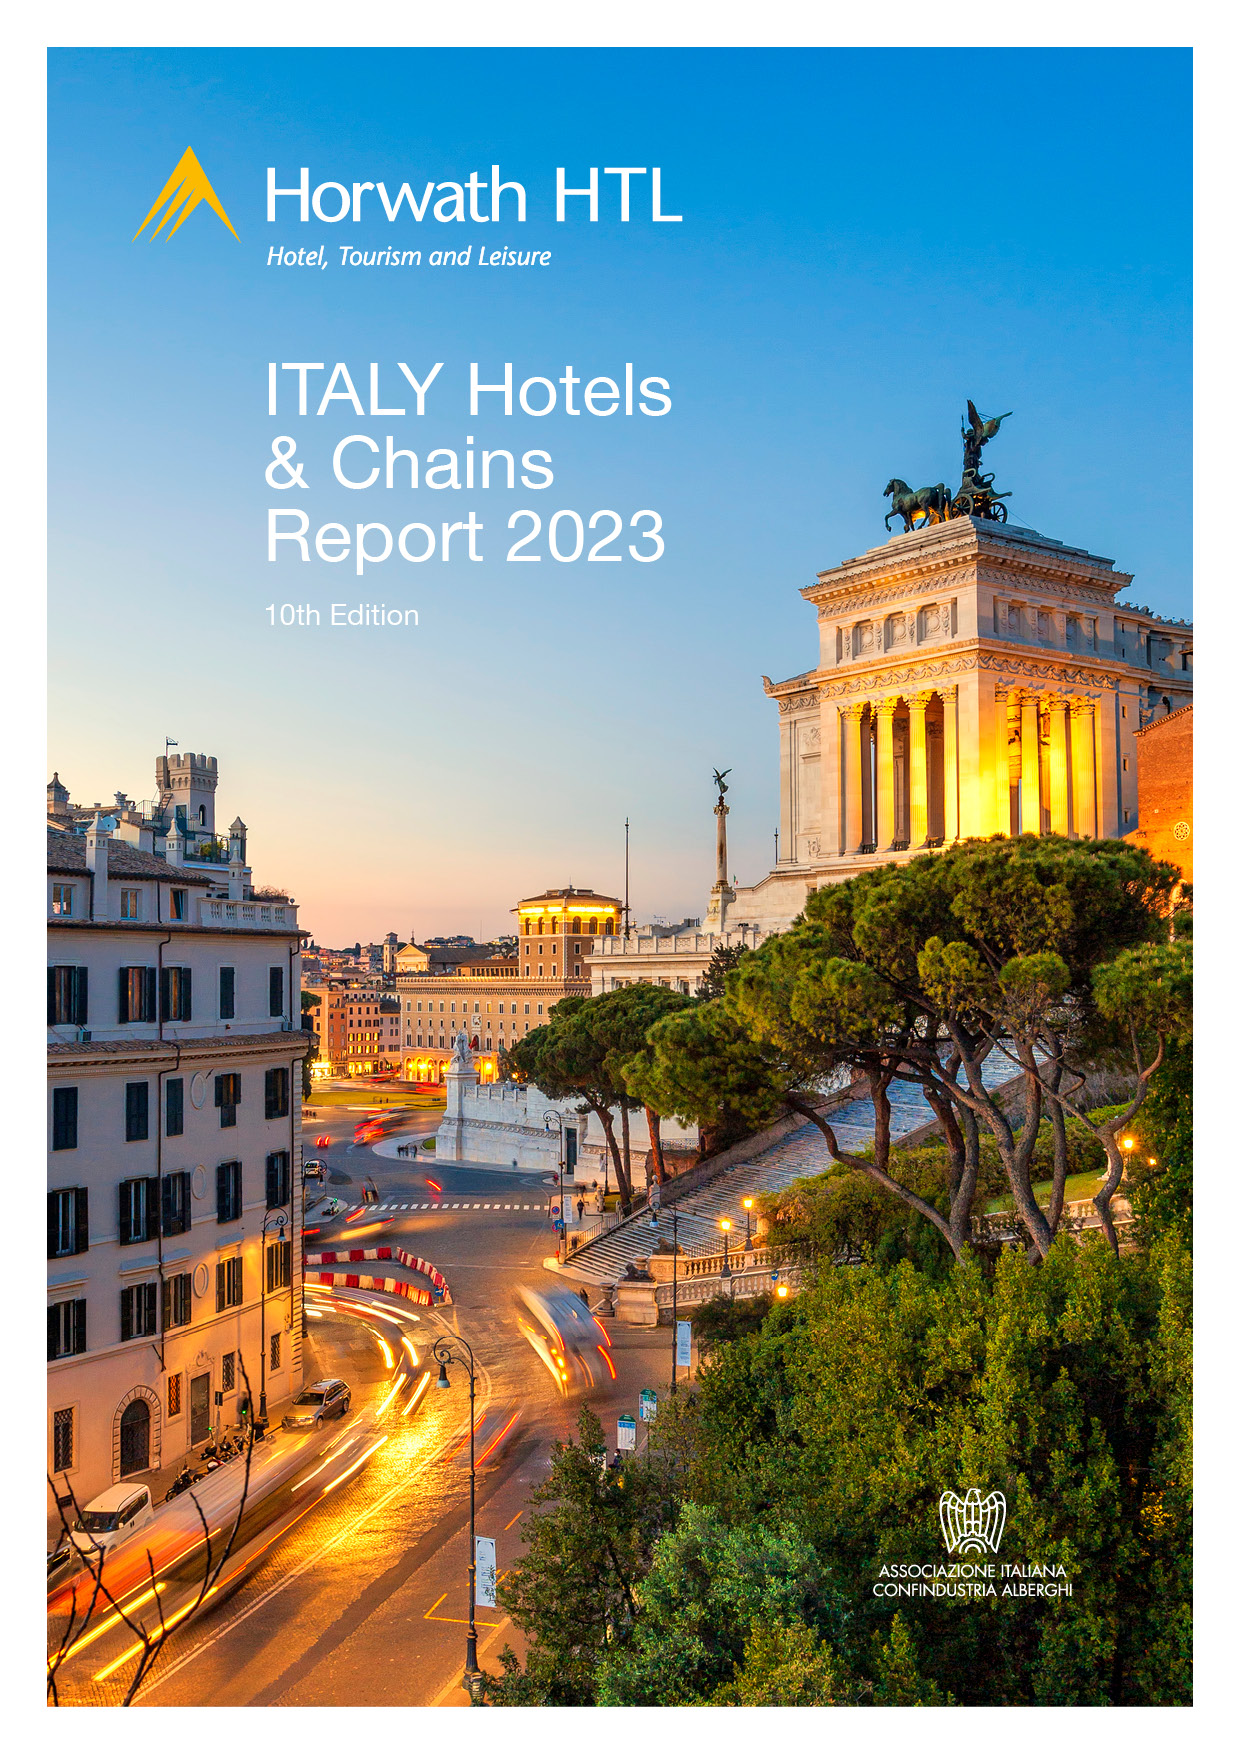 Italy Hotels & Chains Report 2023